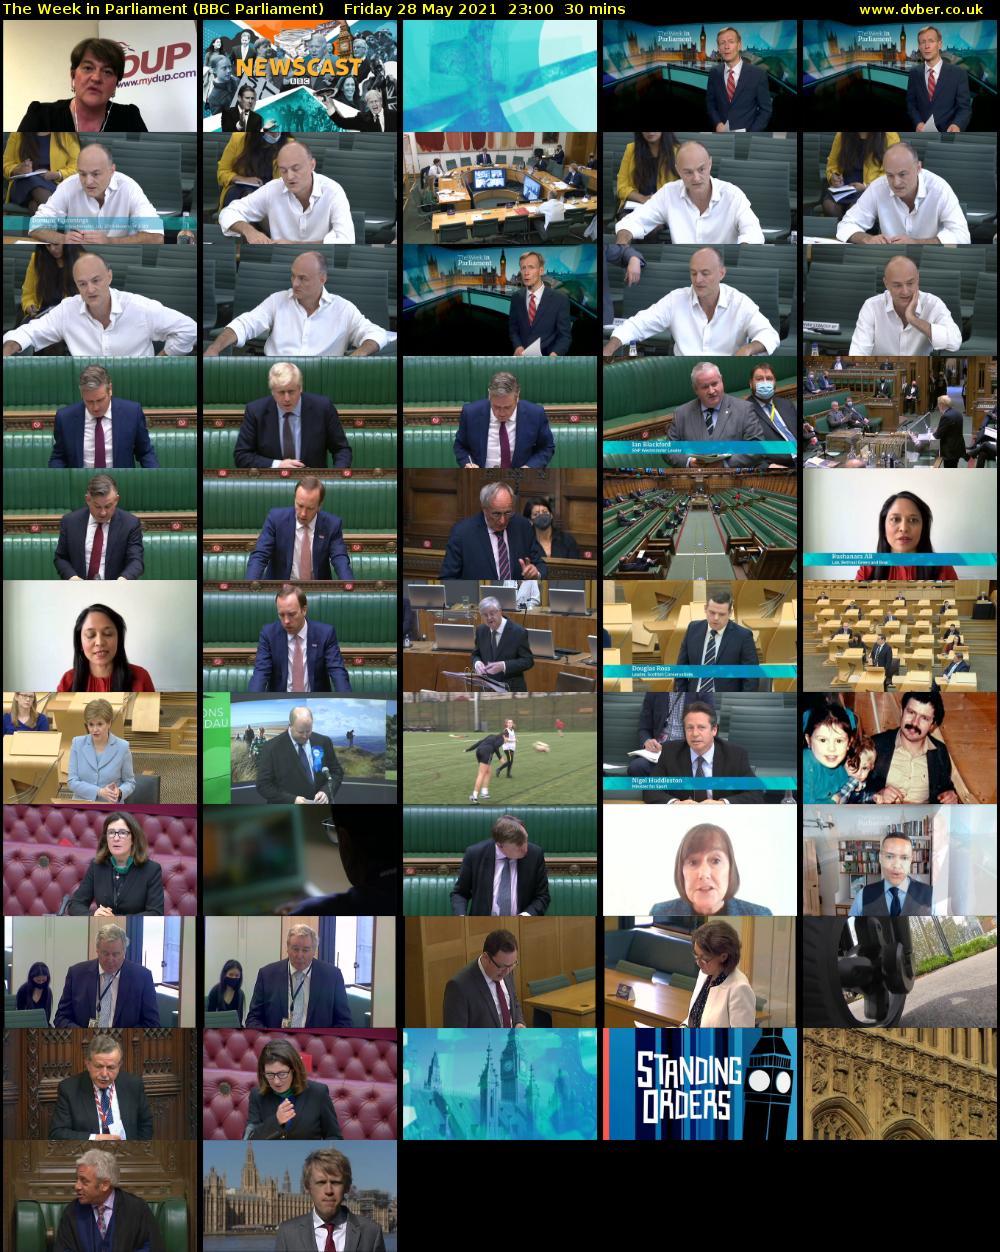 The Week in Parliament (BBC Parliament) Friday 28 May 2021 23:00 - 23:30